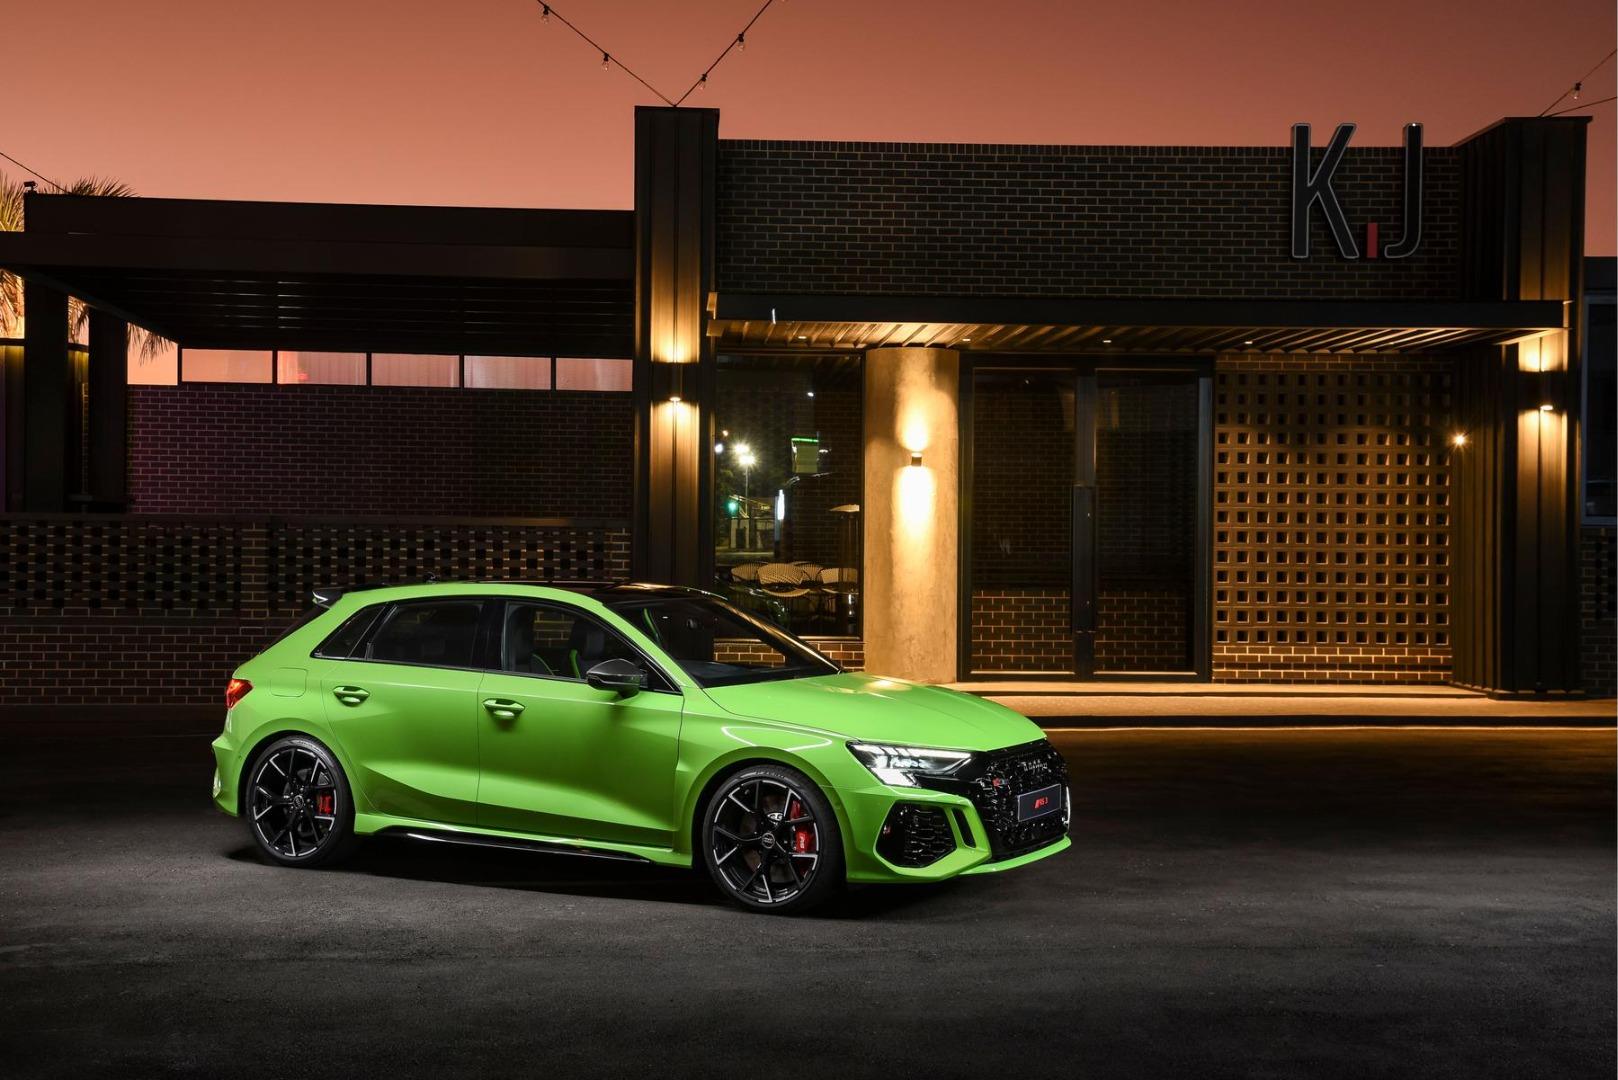 what is the audi rs3 top speed?